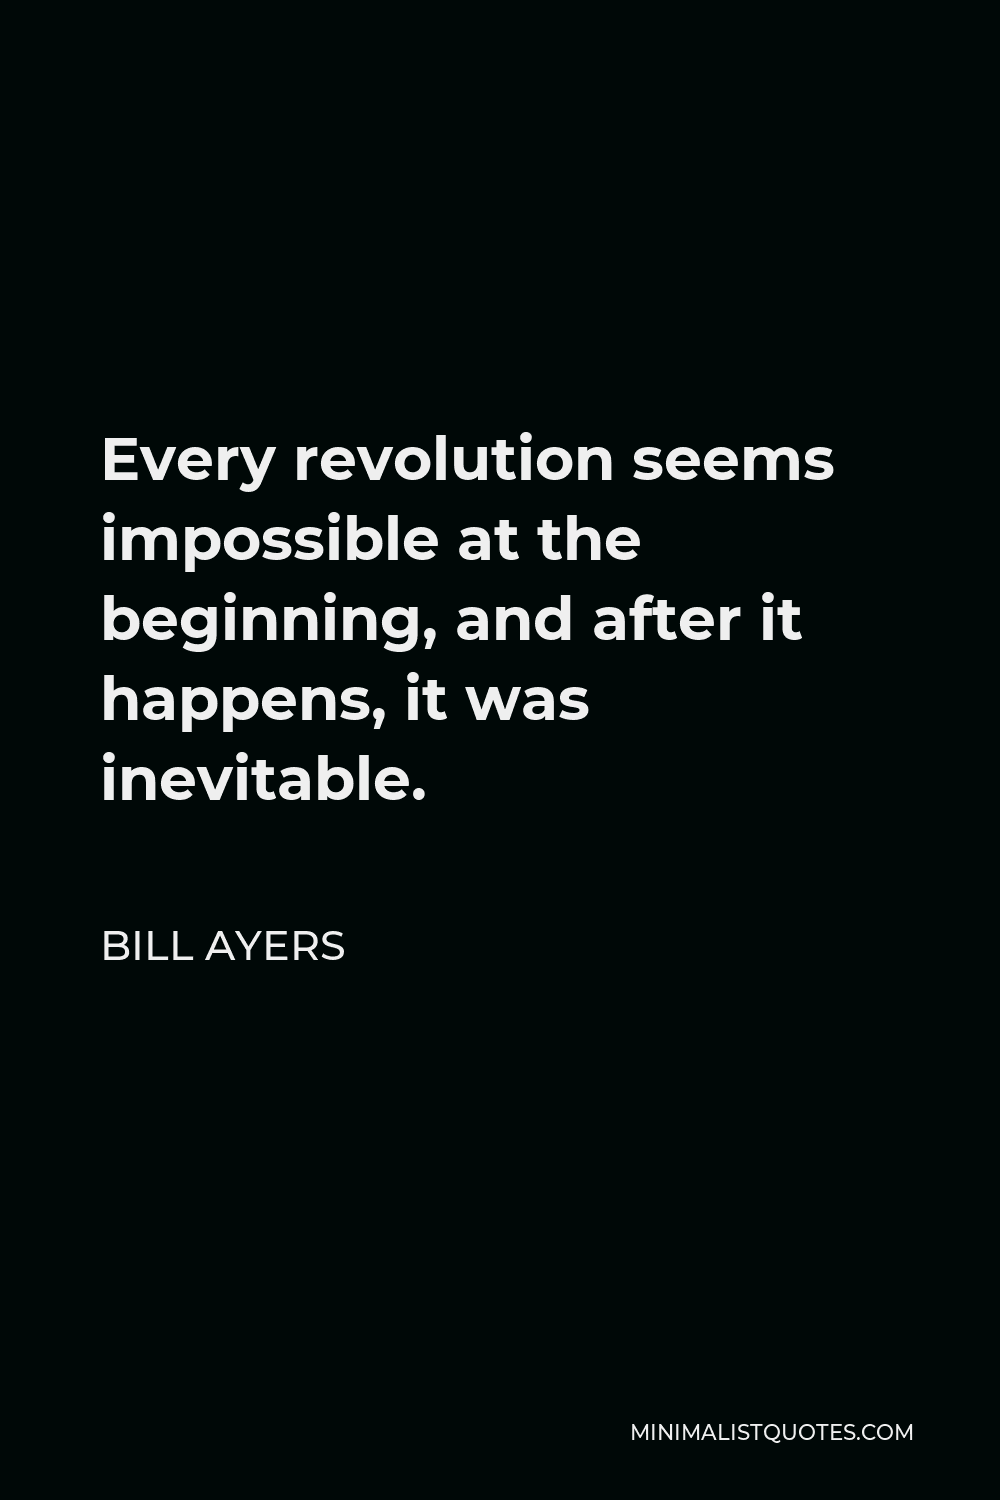 Bill Ayers Quote - Every revolution seems impossible at the beginning, and after it happens, it was inevitable.